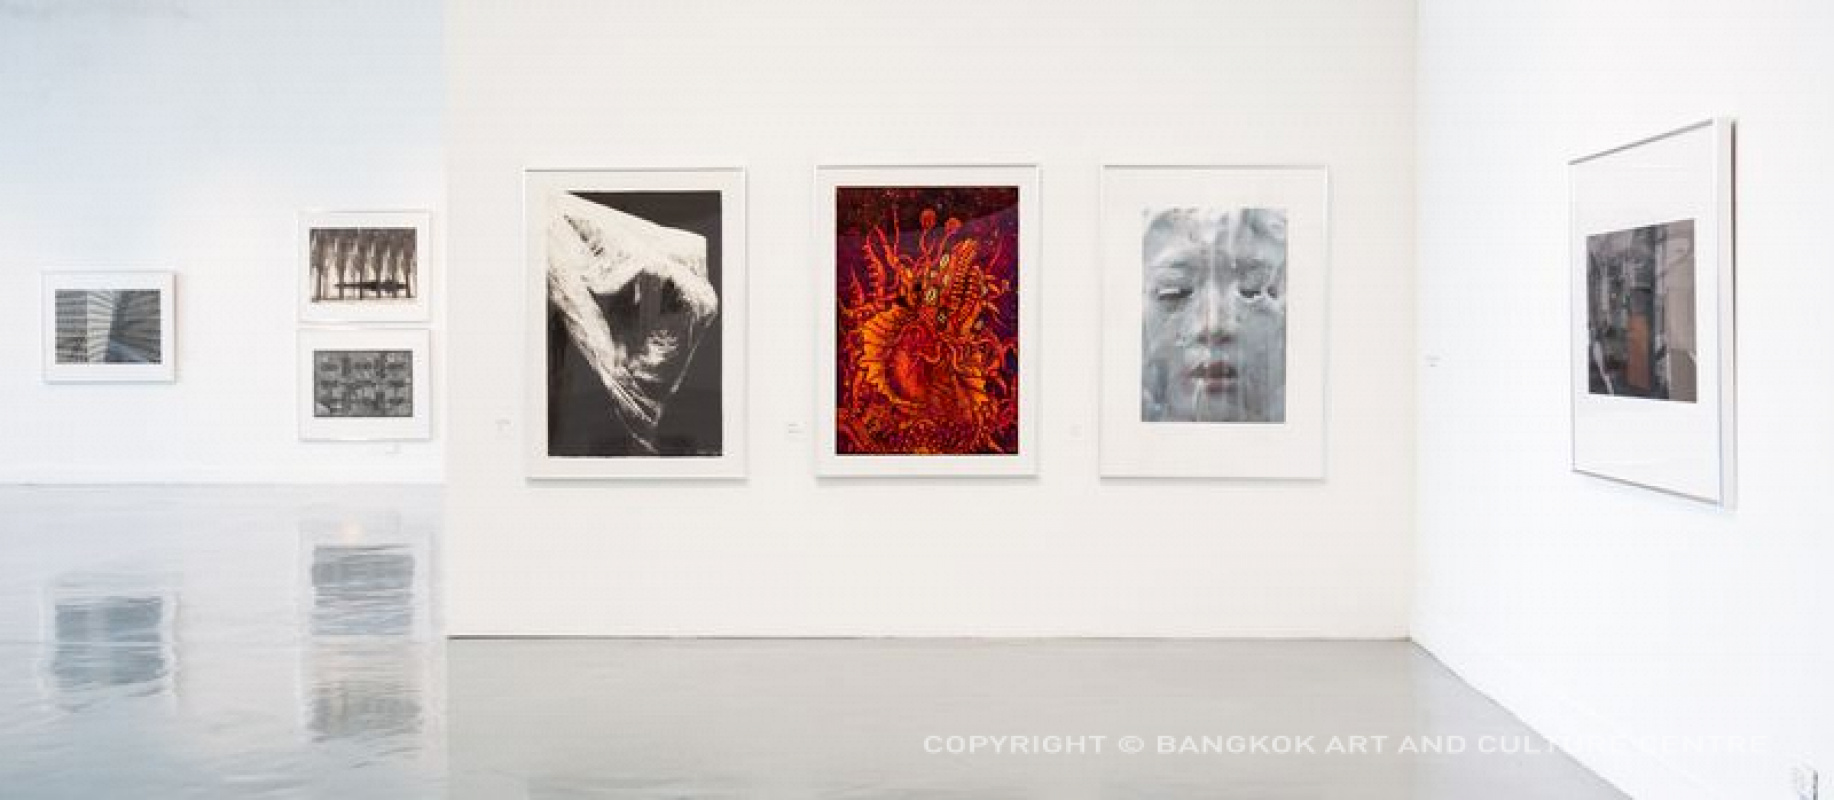 The 5th Bangkok Triennale International Print and Drawing Exhibition